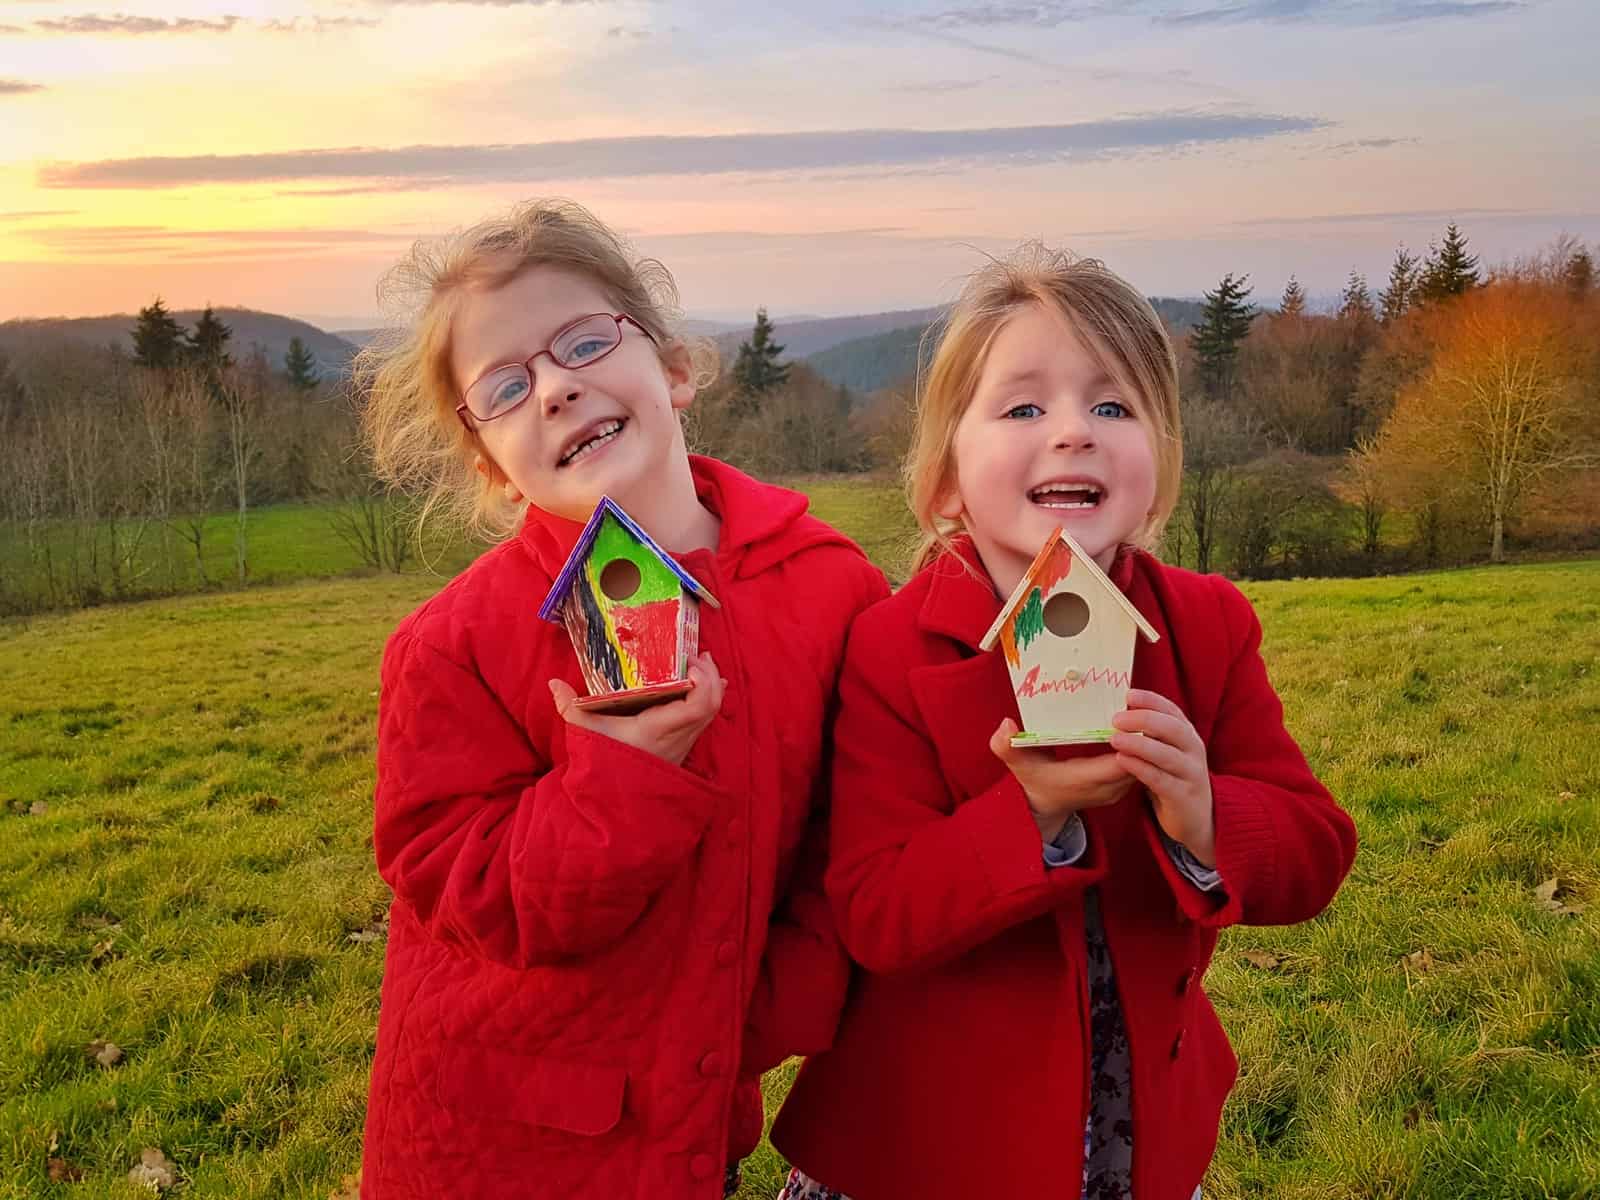 Crowngate Shopping Centre Worcester kids club girls showing bird houses against sunset sky